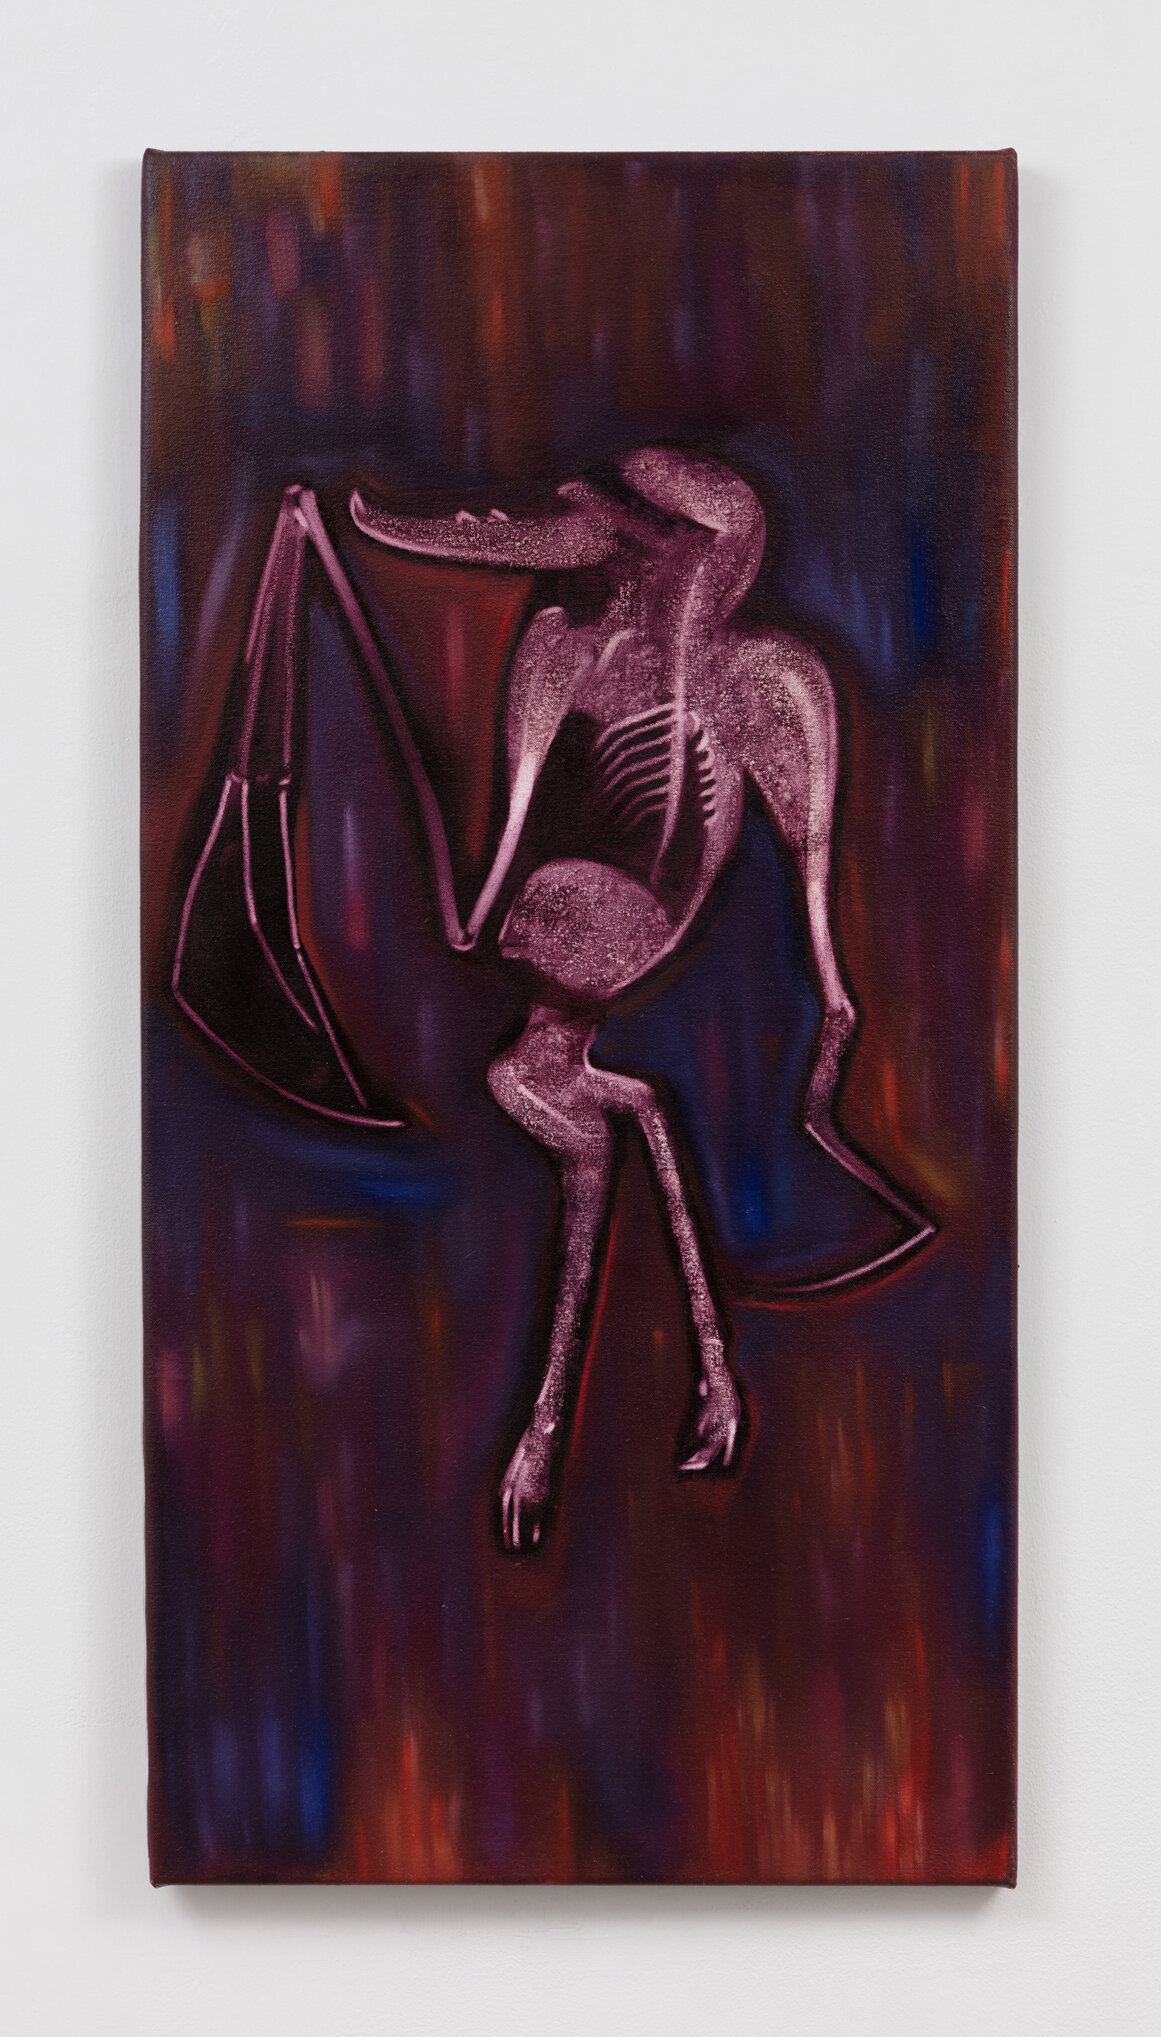   Ruby Bat,  2020. Oil on canvas. 38 x 19 inches. 